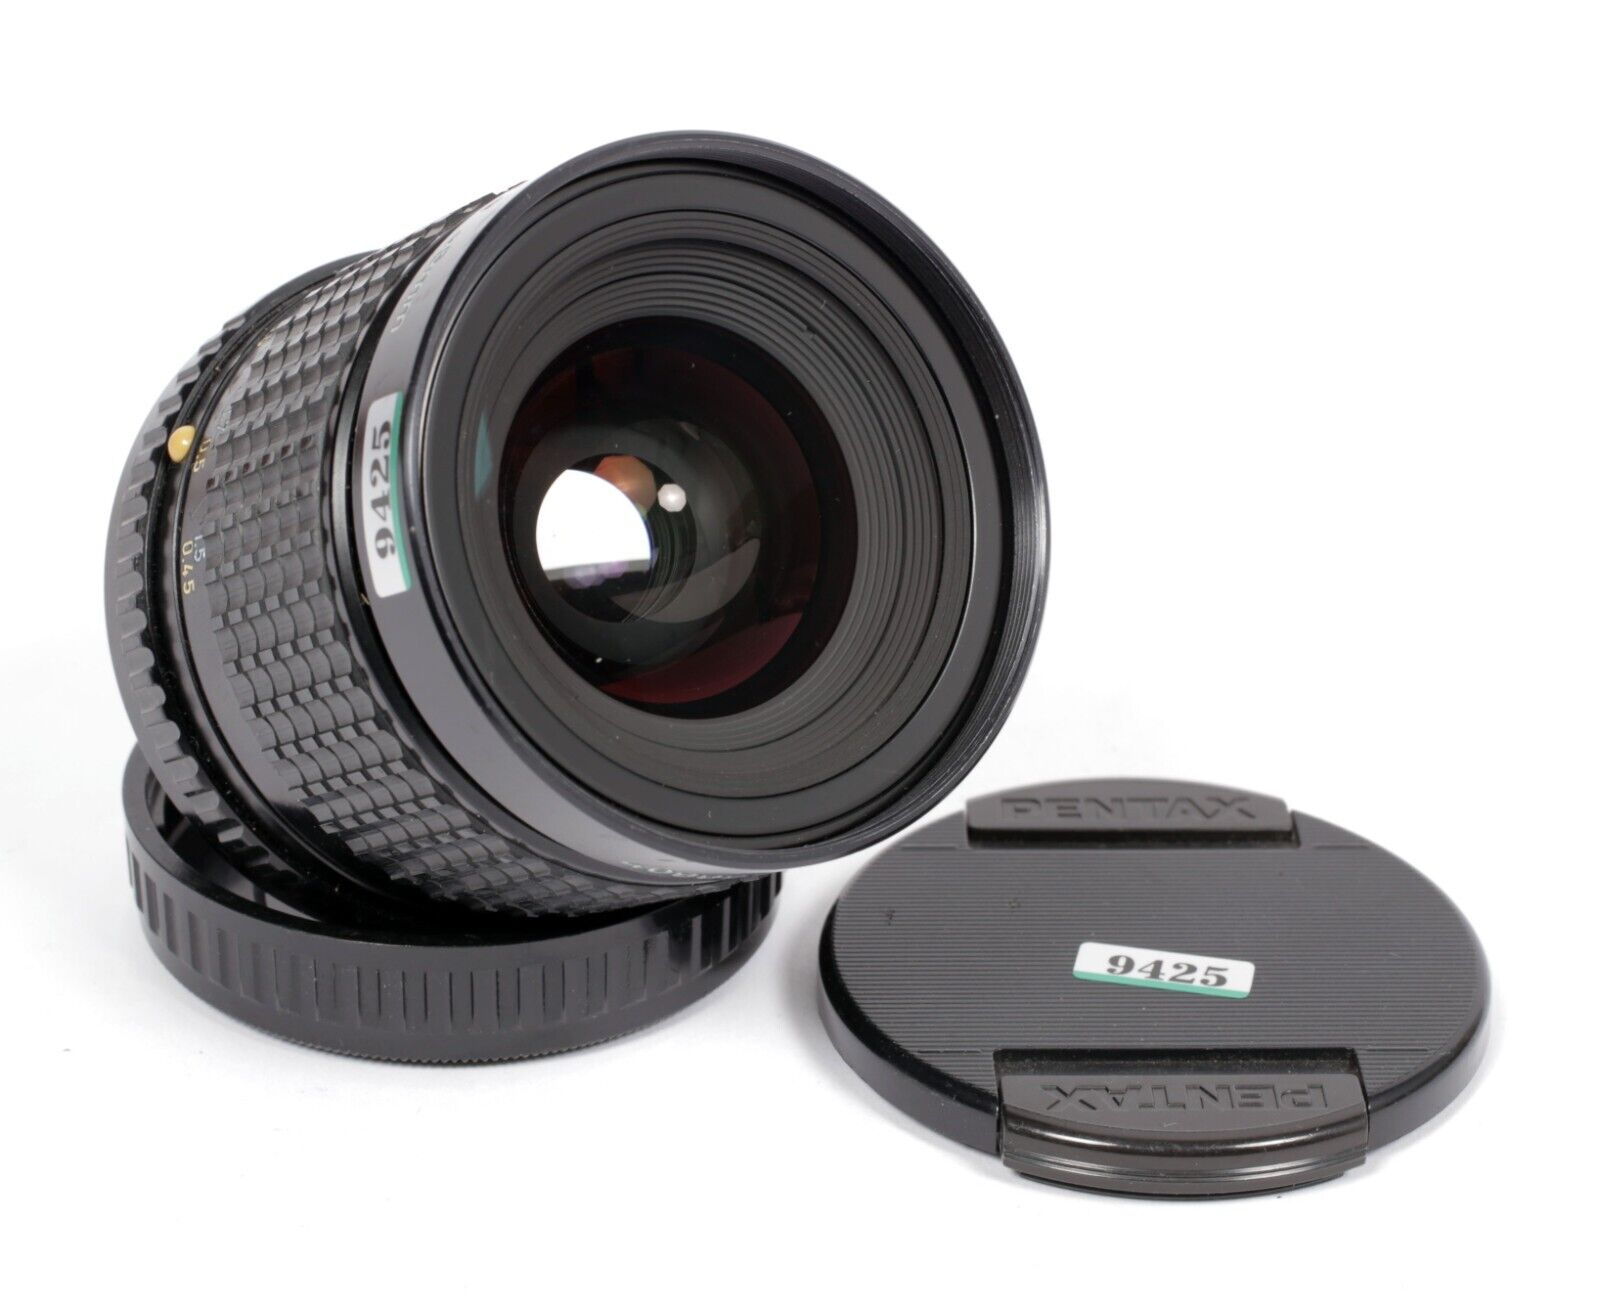 SMC Pentax A 645 45mm F2.8 wide angle lens #9425 | CatLABS